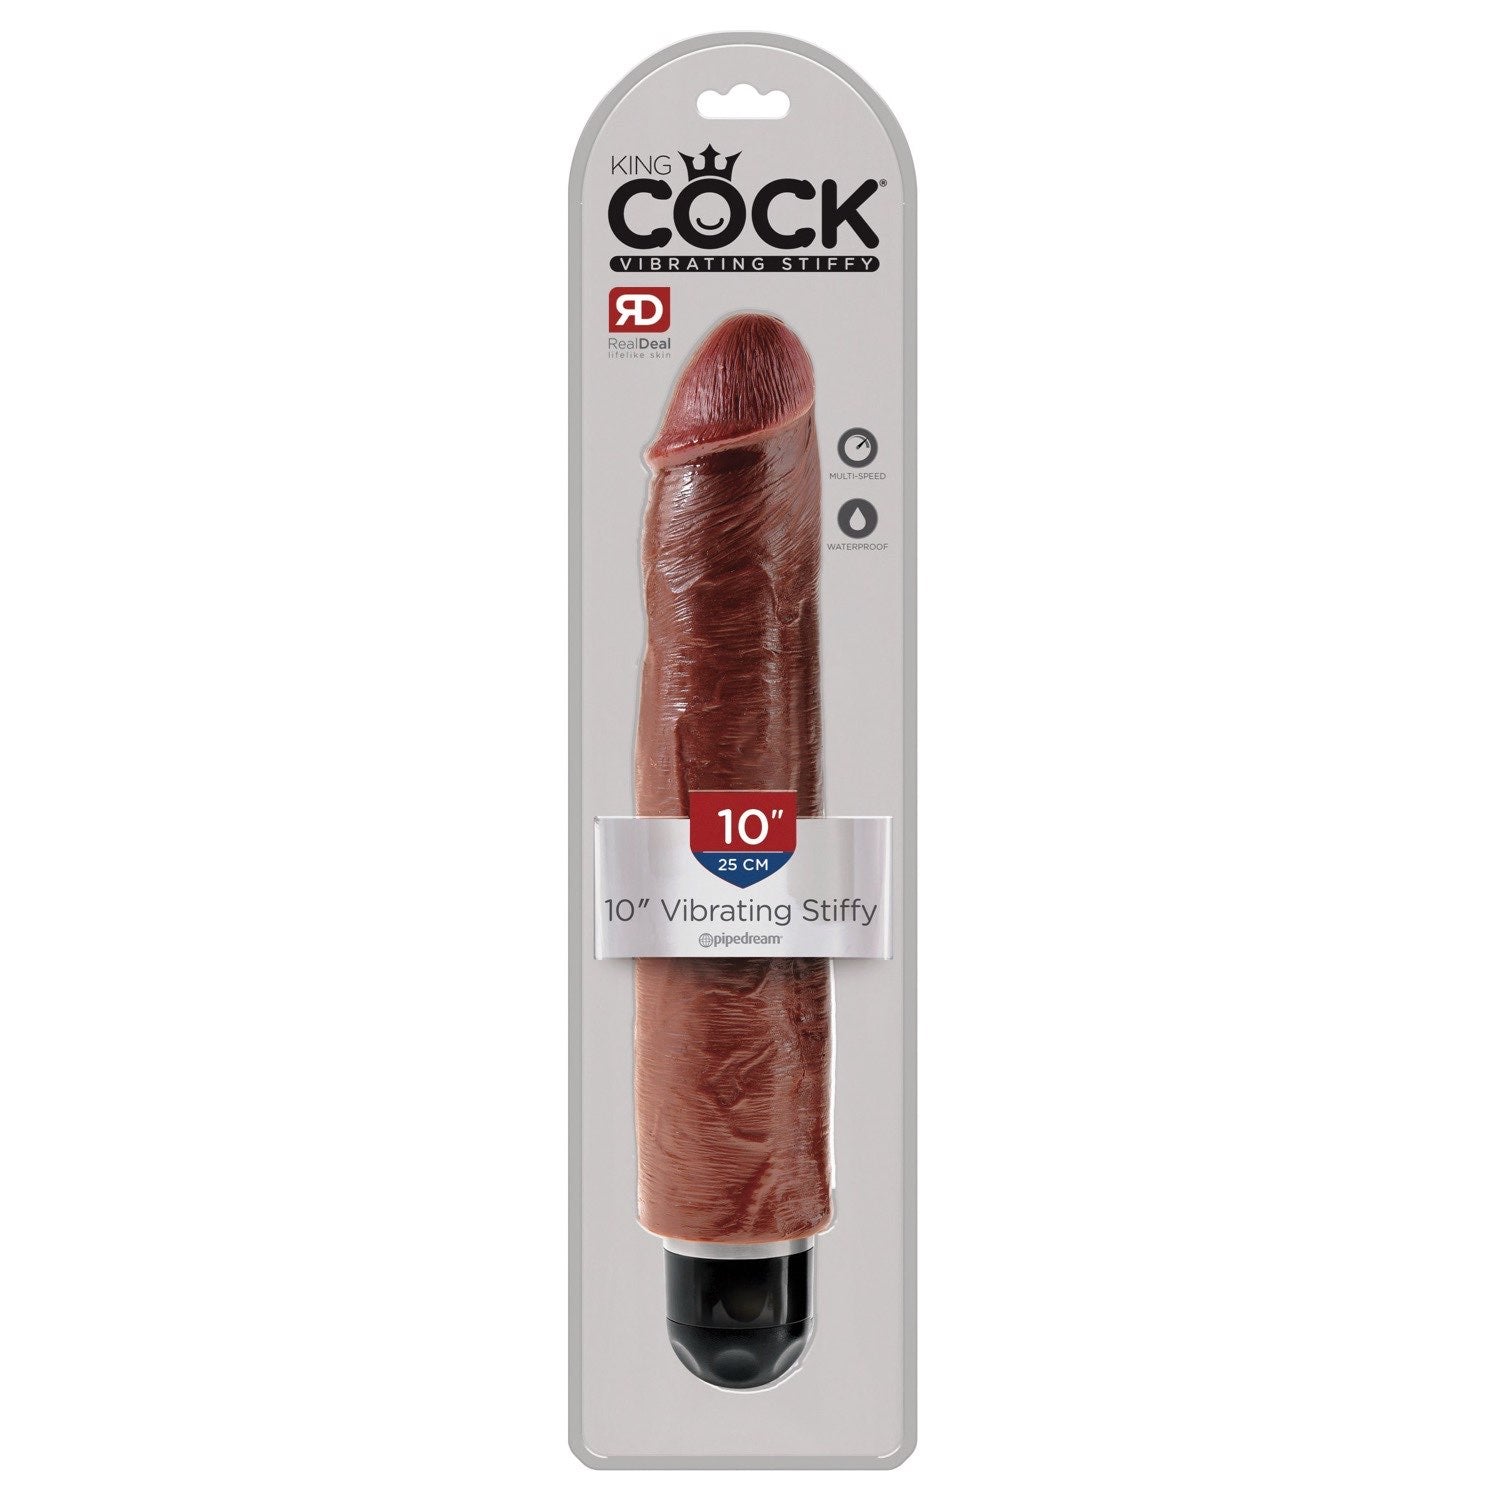 King Cock 10&quot; Vibrating Stiffy - Brown 25.4 cm Vibrating Dong by Pipedream